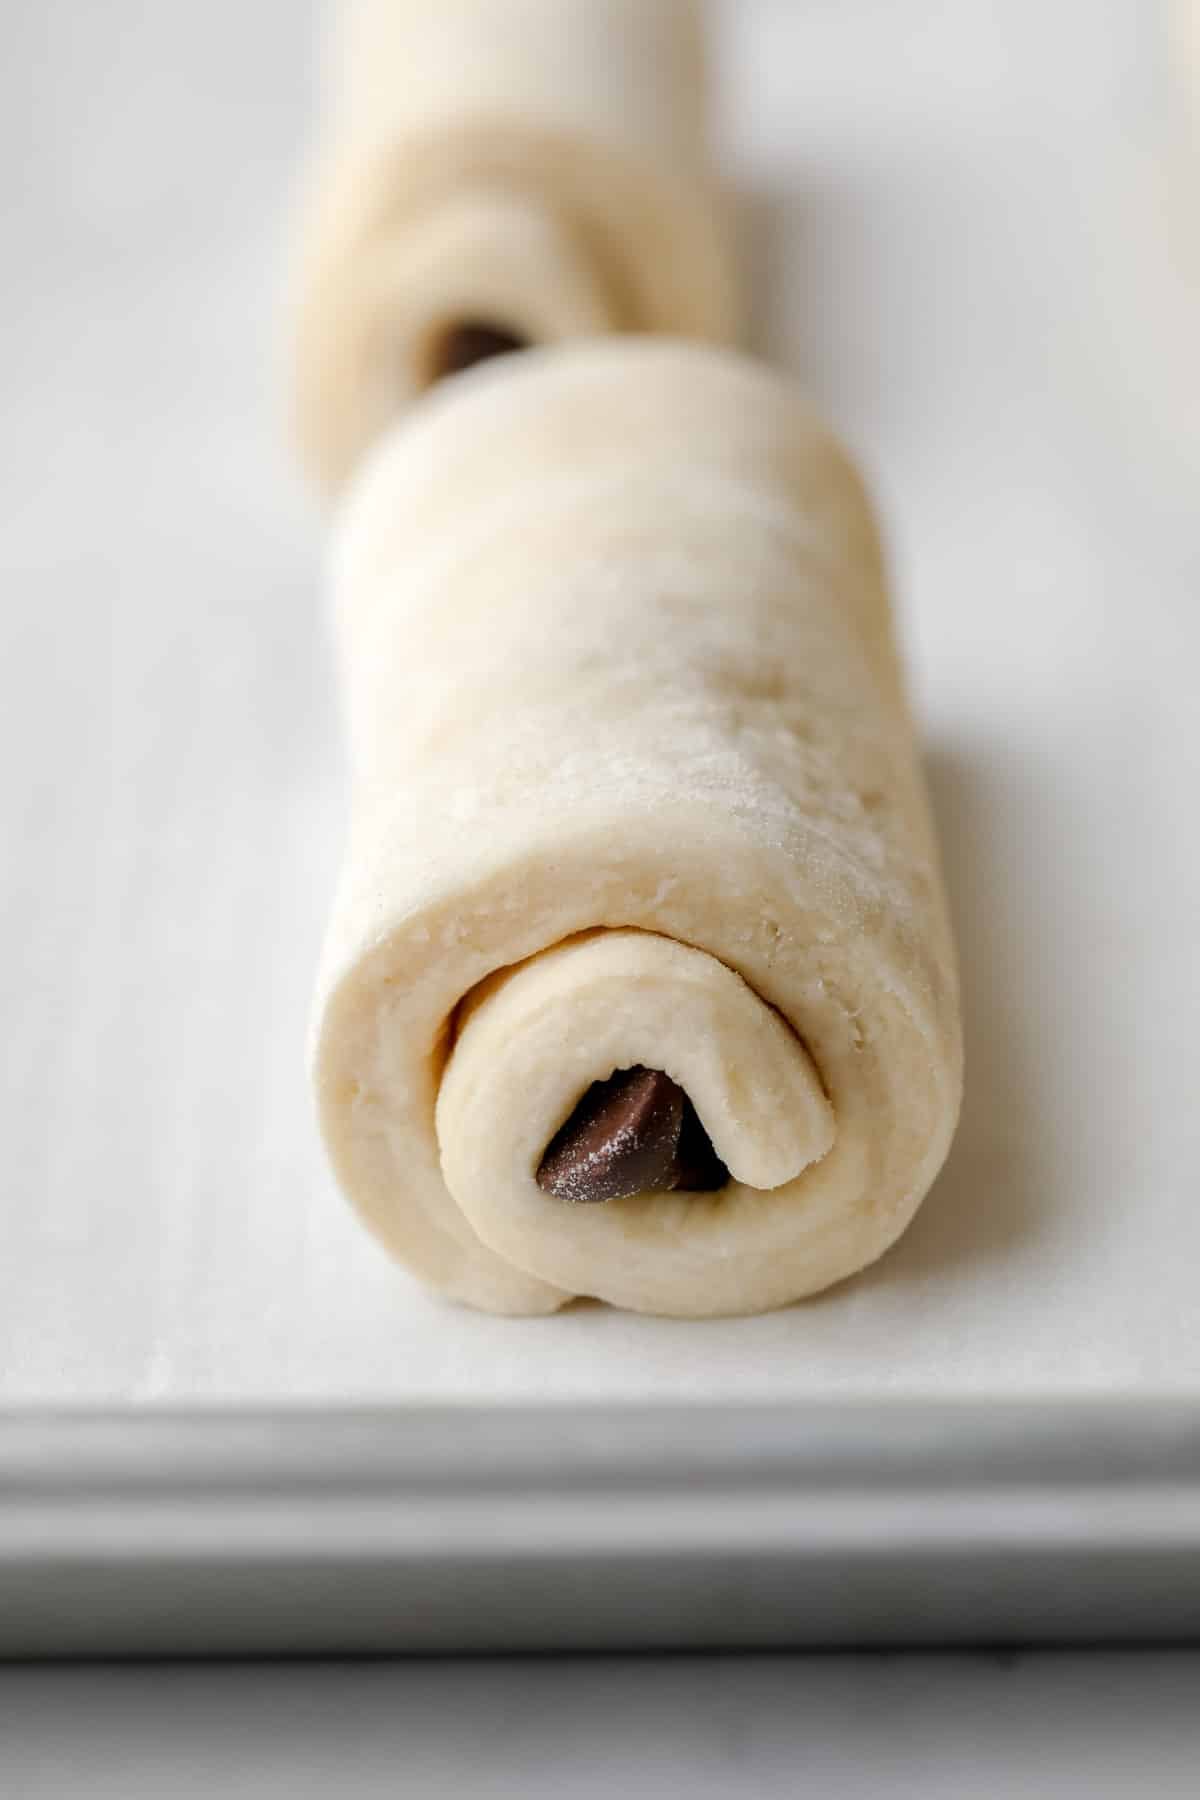 rolled chocolate filled pastry unbaked on a parchment lined pan